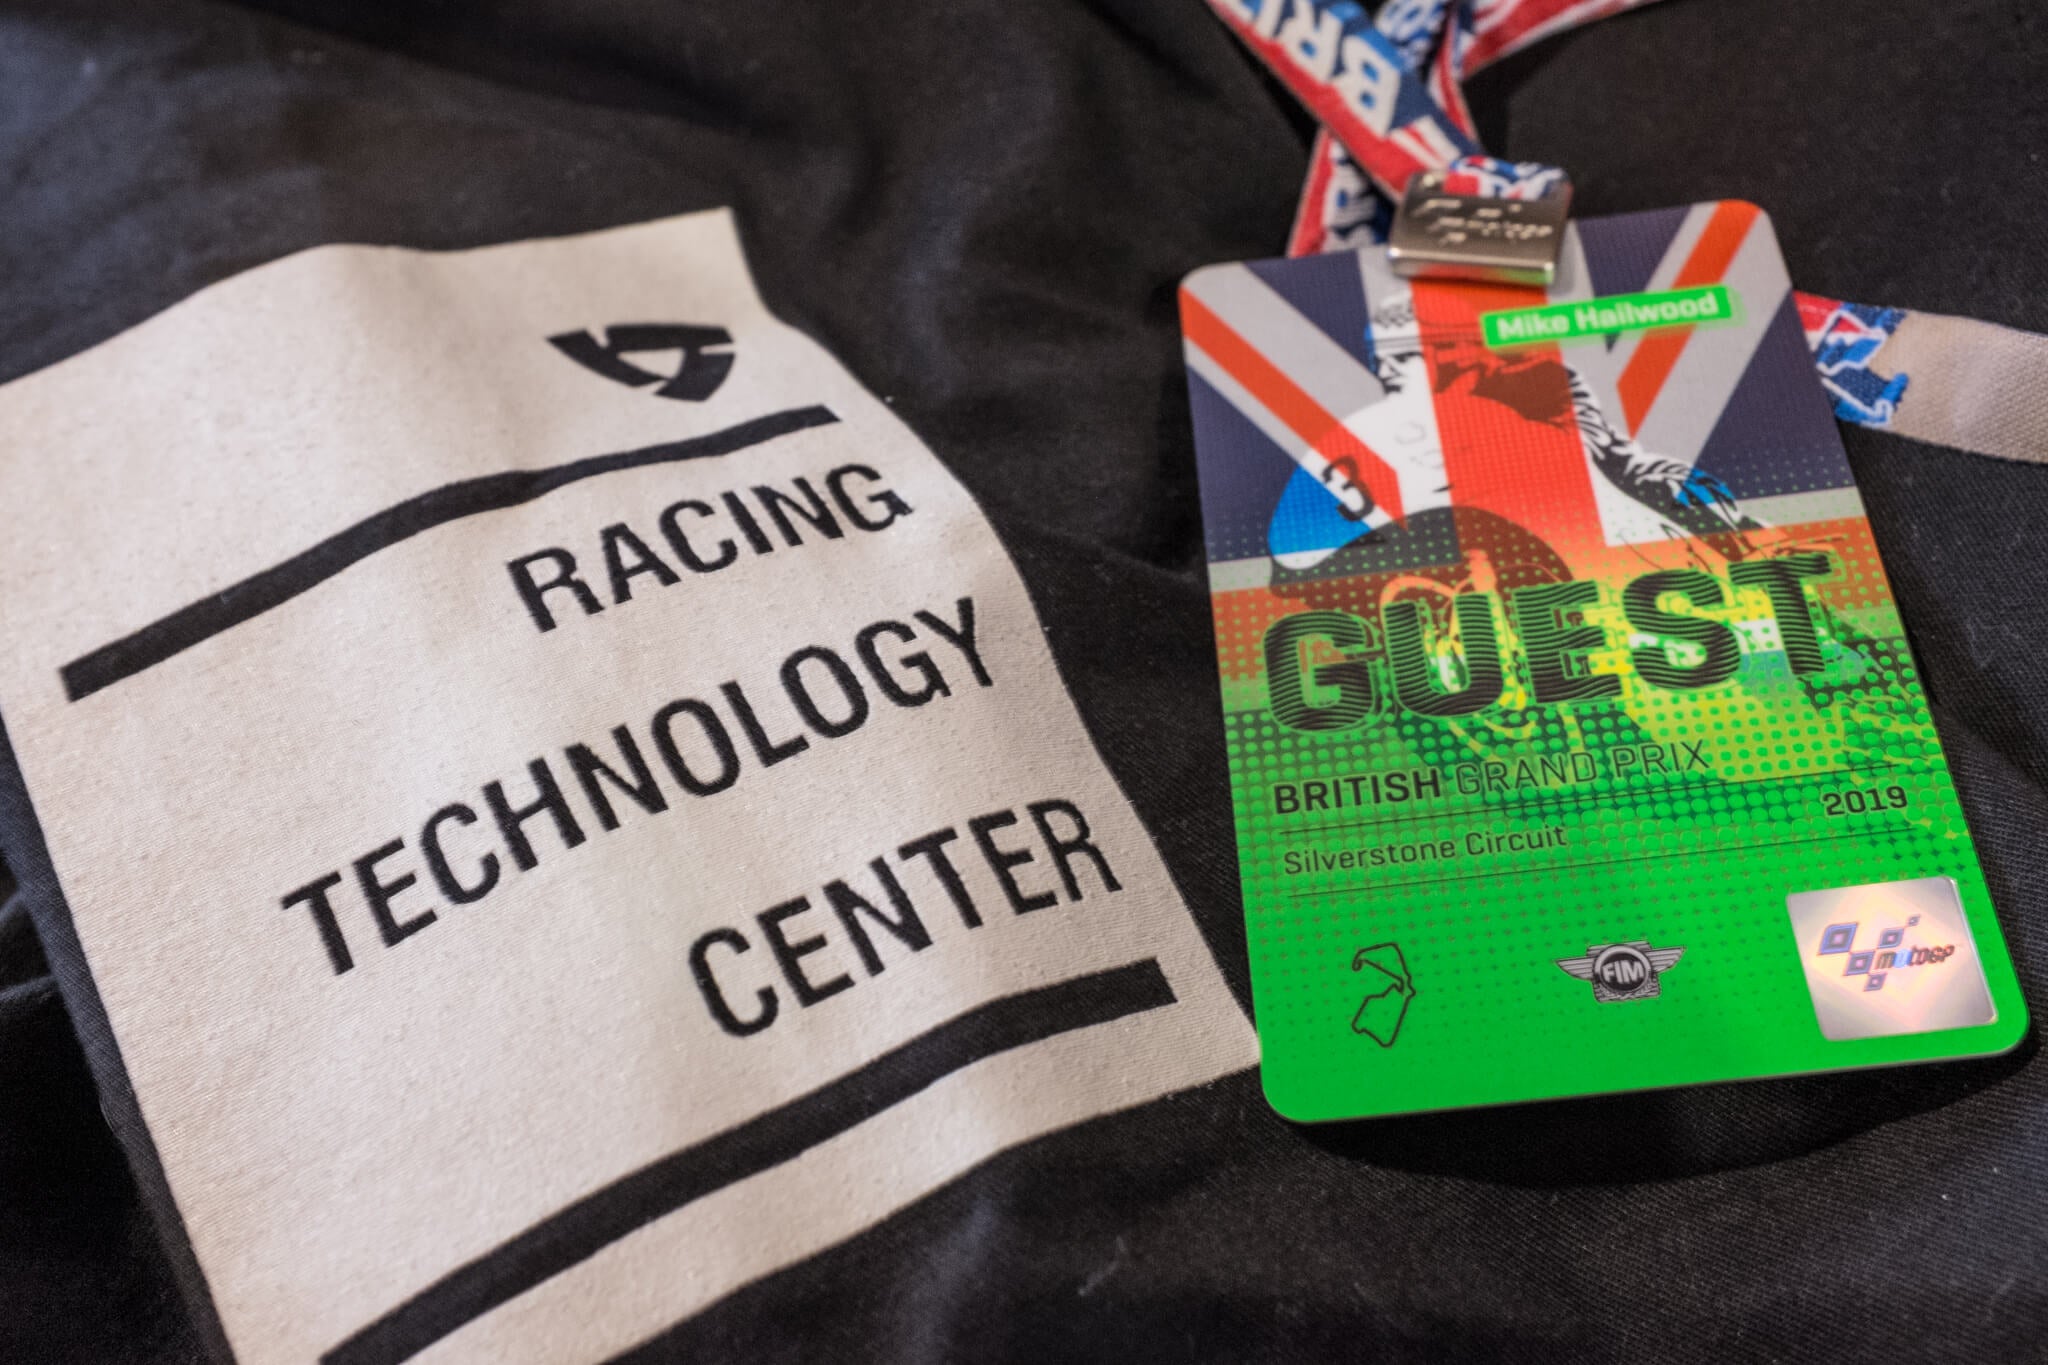 My pass for the whole weekend Paddock MotoGP Silverstone 2019